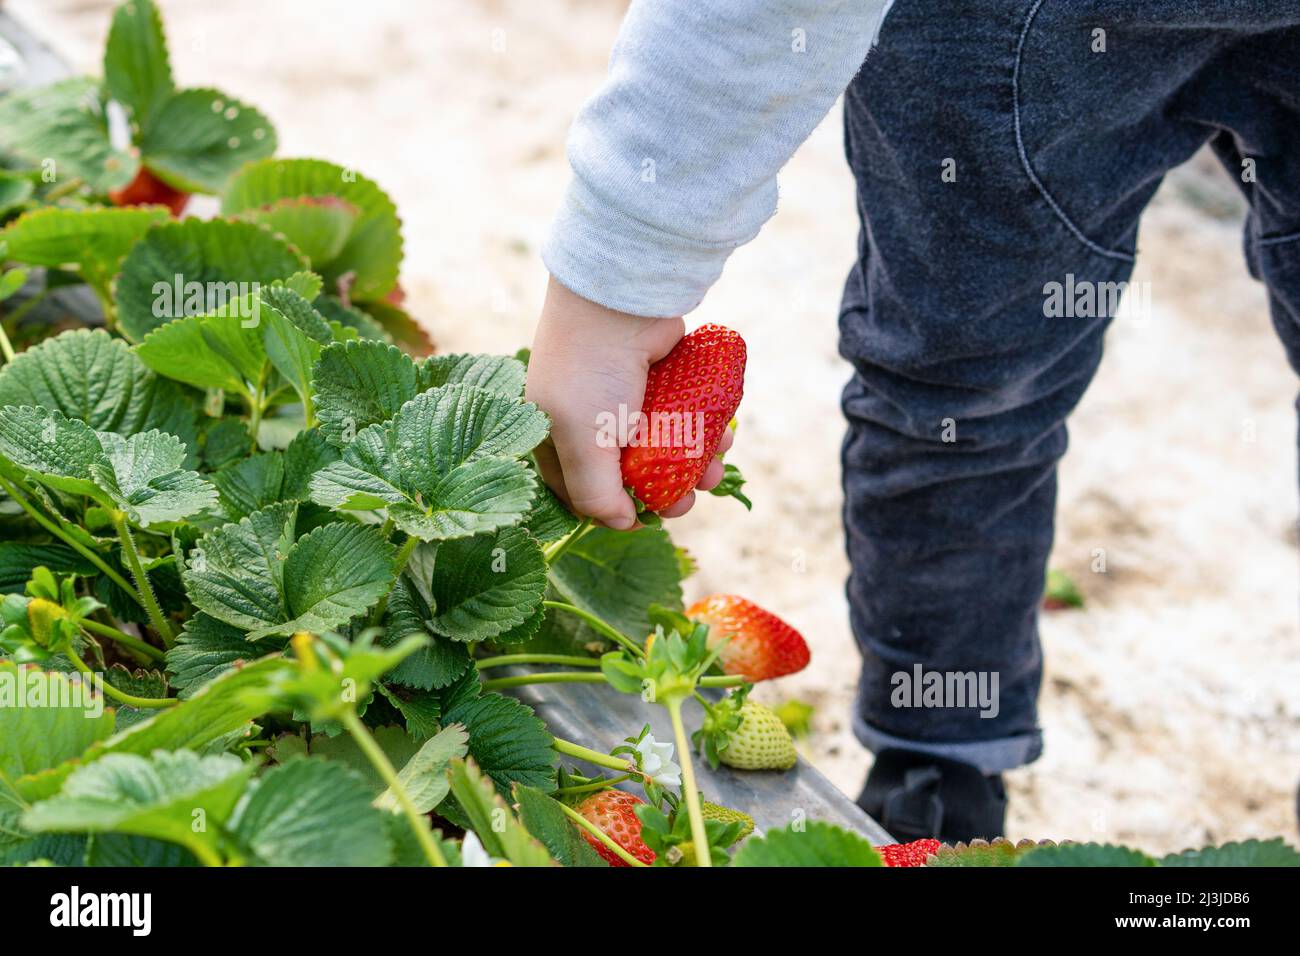 Series of images of family picking their own strawberries. Speaks to healthy lifestyle and increasing interest in eating locally grown produce and community supported agriculture shares. Stock Photo